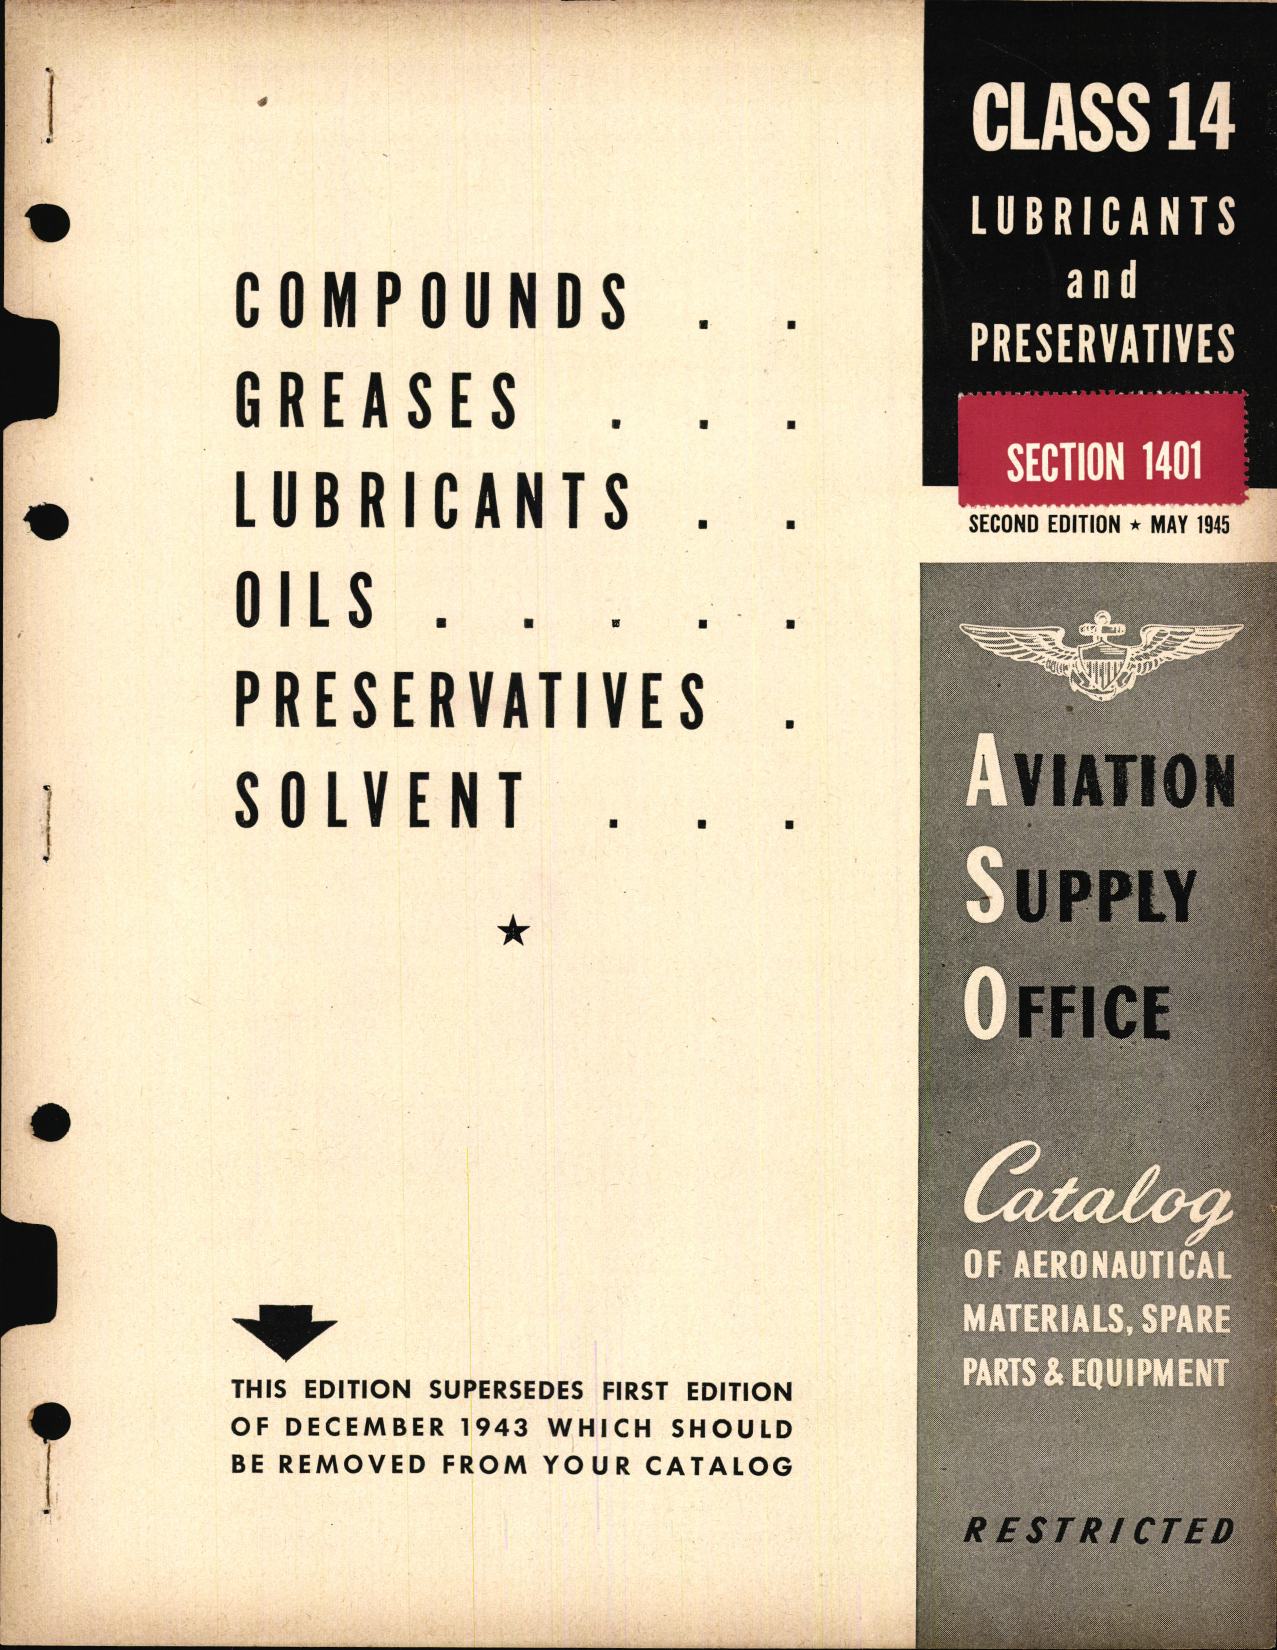 Sample page 1 from AirCorps Library document: Compounds, Greases, Lubricants, Oils, Preservatives, Solvent